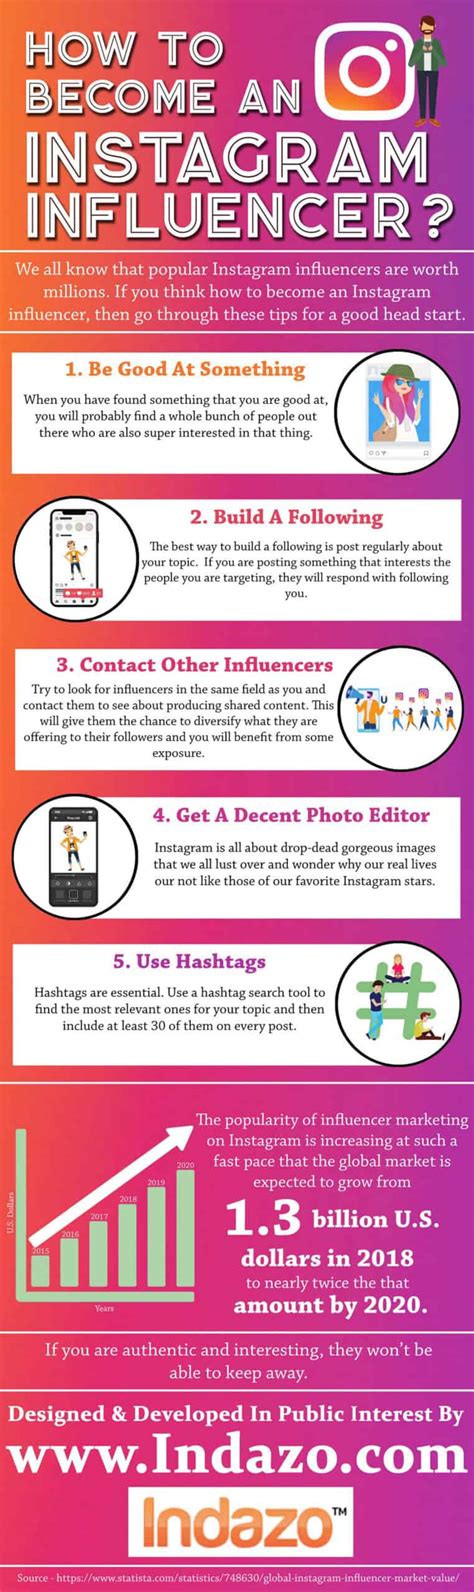 How to become an instagram influencer. With 800 million monthly active users, Instagram has become one of the most popular social media channels.But that’s not all; Instagram also has the highest interaction rate compared to all the other channels, according to Quintly.This high interaction rate is exactly why brands are flocking to the platform to partner with … 